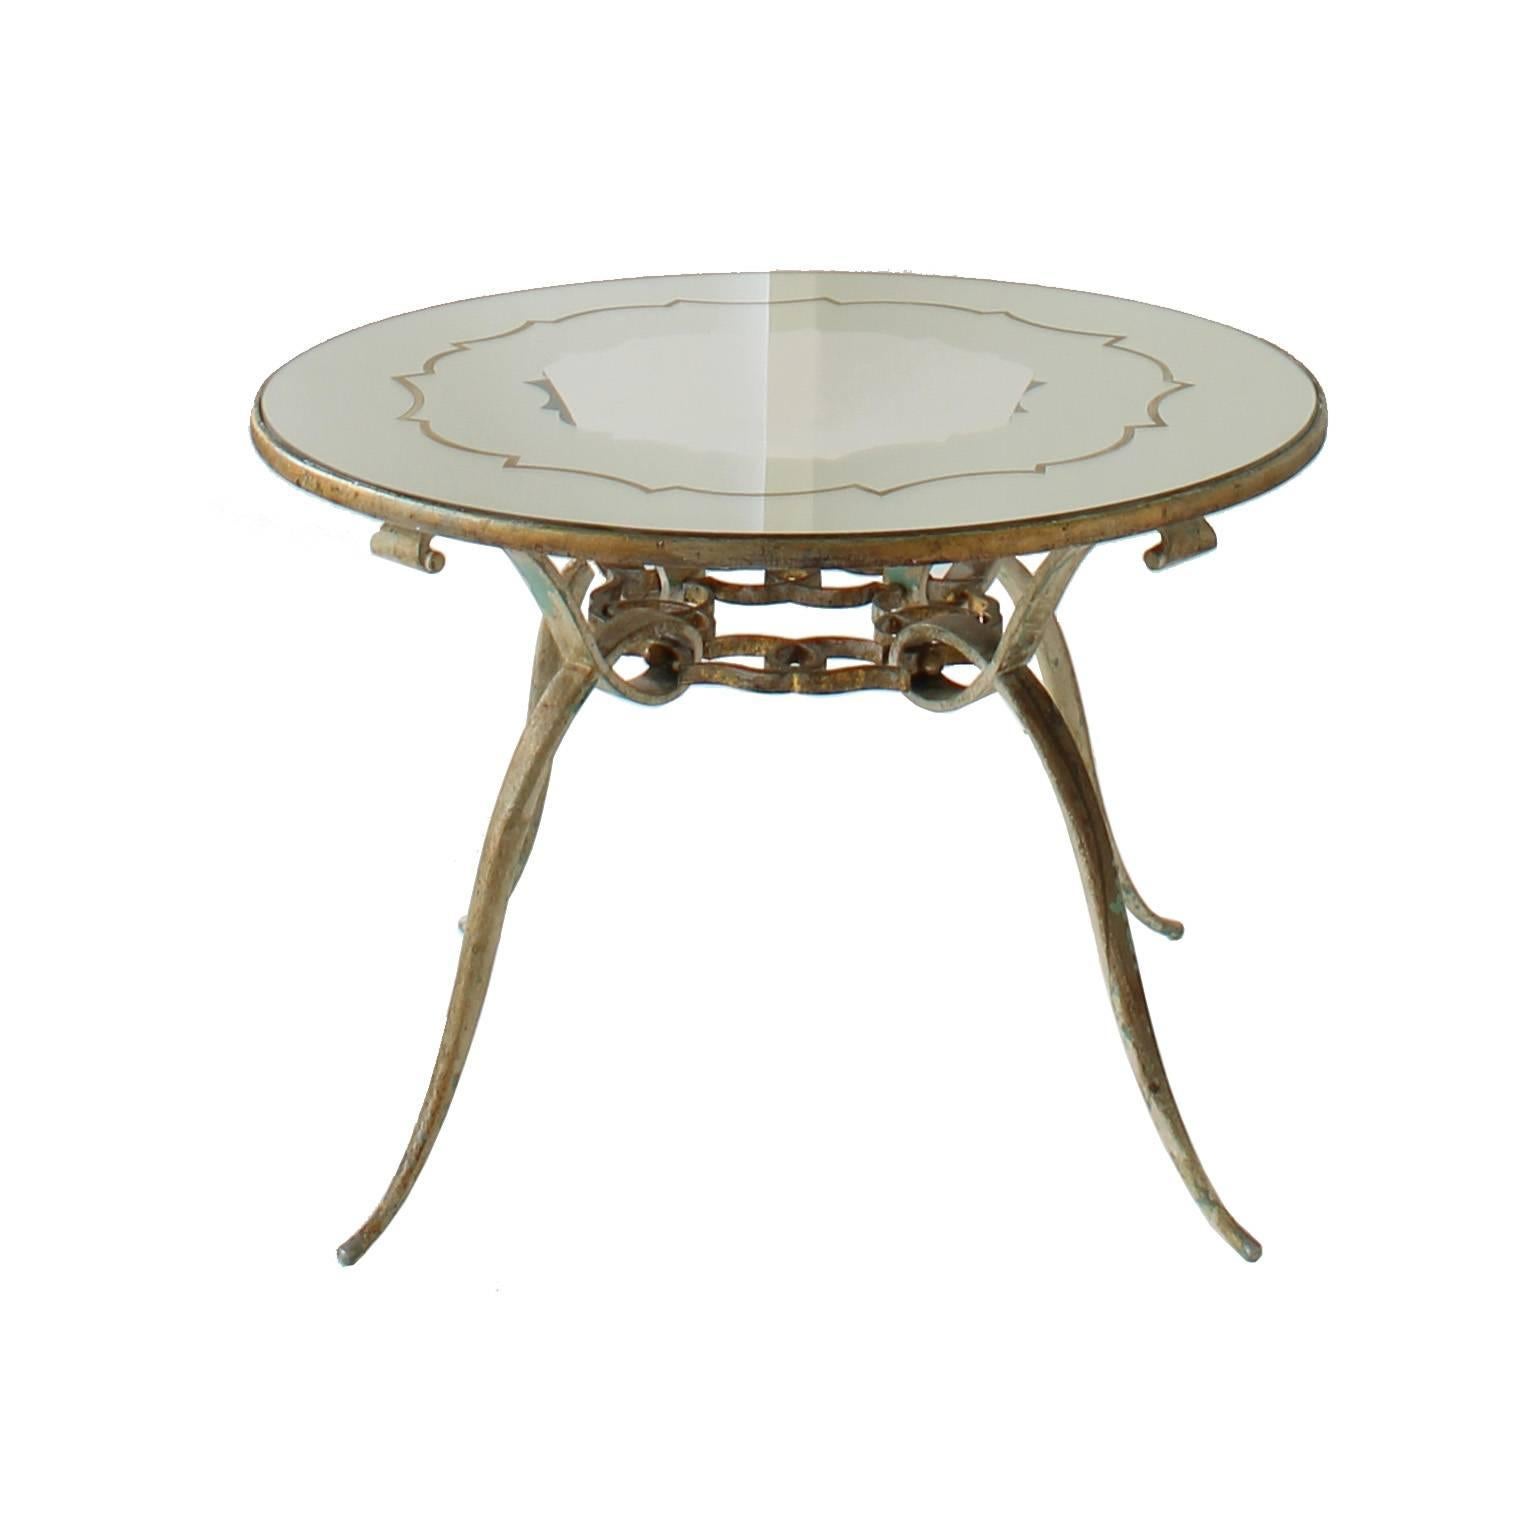 Four leg mirrored coffee table. Mirrored top has a designed pattern which mimics
the metalwork below. Slender round legs end at top with scrolls. Gilt metal finish. Some wear.

Architect, Sandy Littman of Duesenberg LTD.  and The American Glass